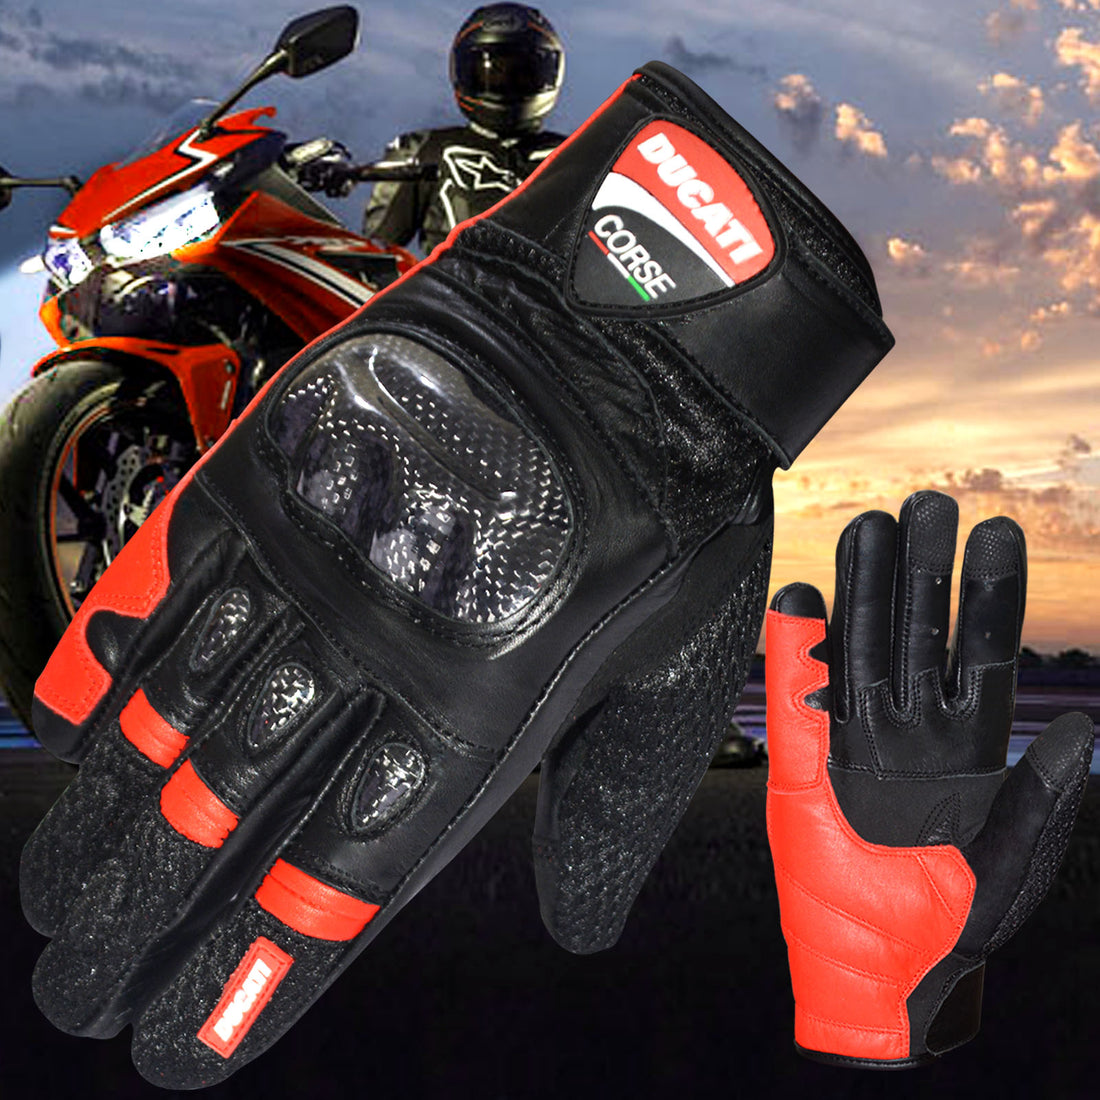 Ducati Corse New Leather Racing Motorbike Glove Pre-Curved Finger Motorcycle Gloves (Black Red)